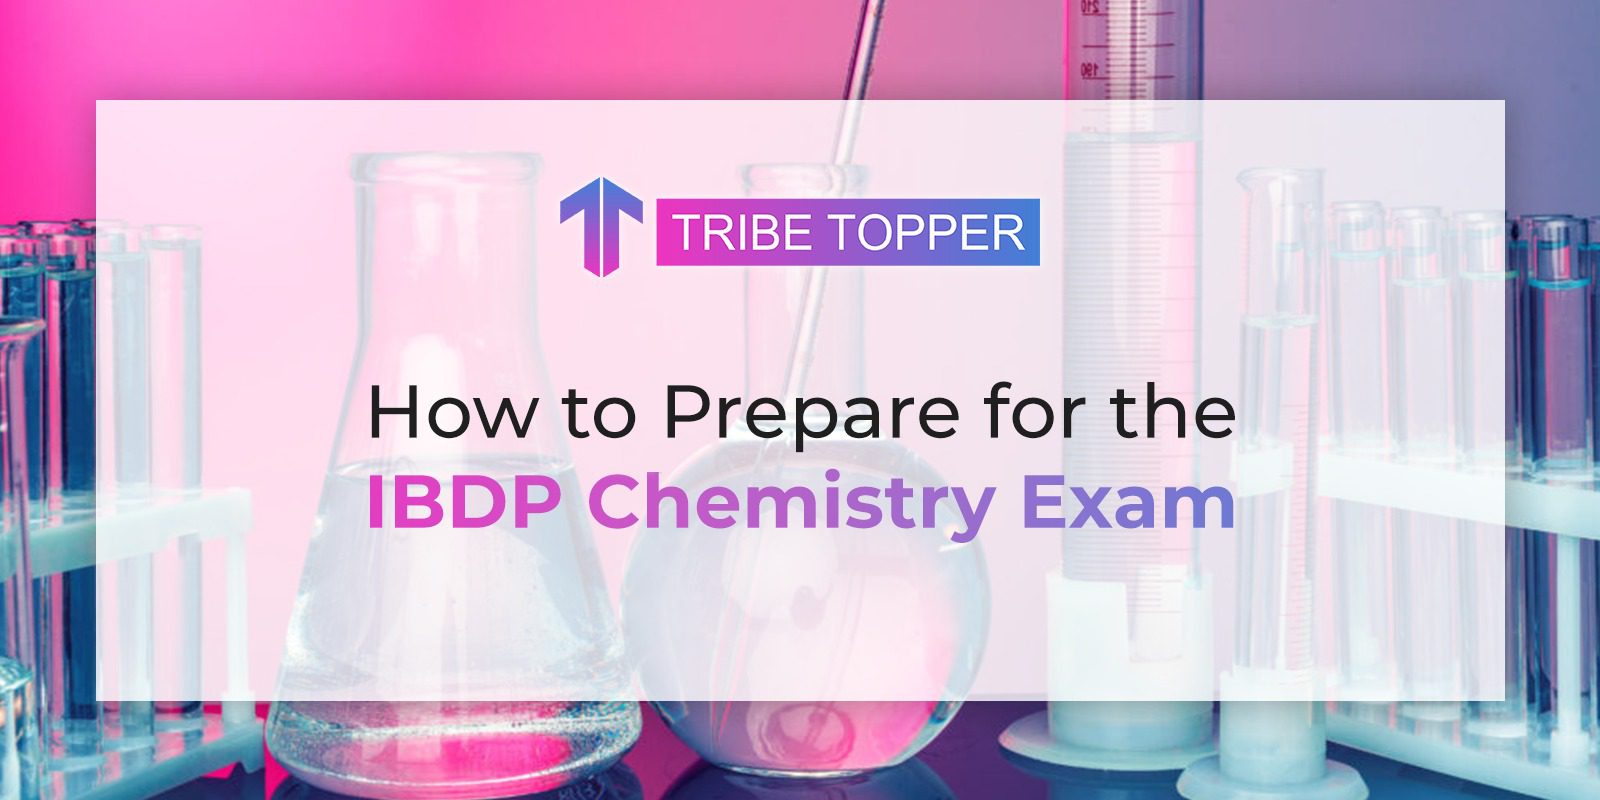 How to Prepare for the IBDP Chemistry Exam